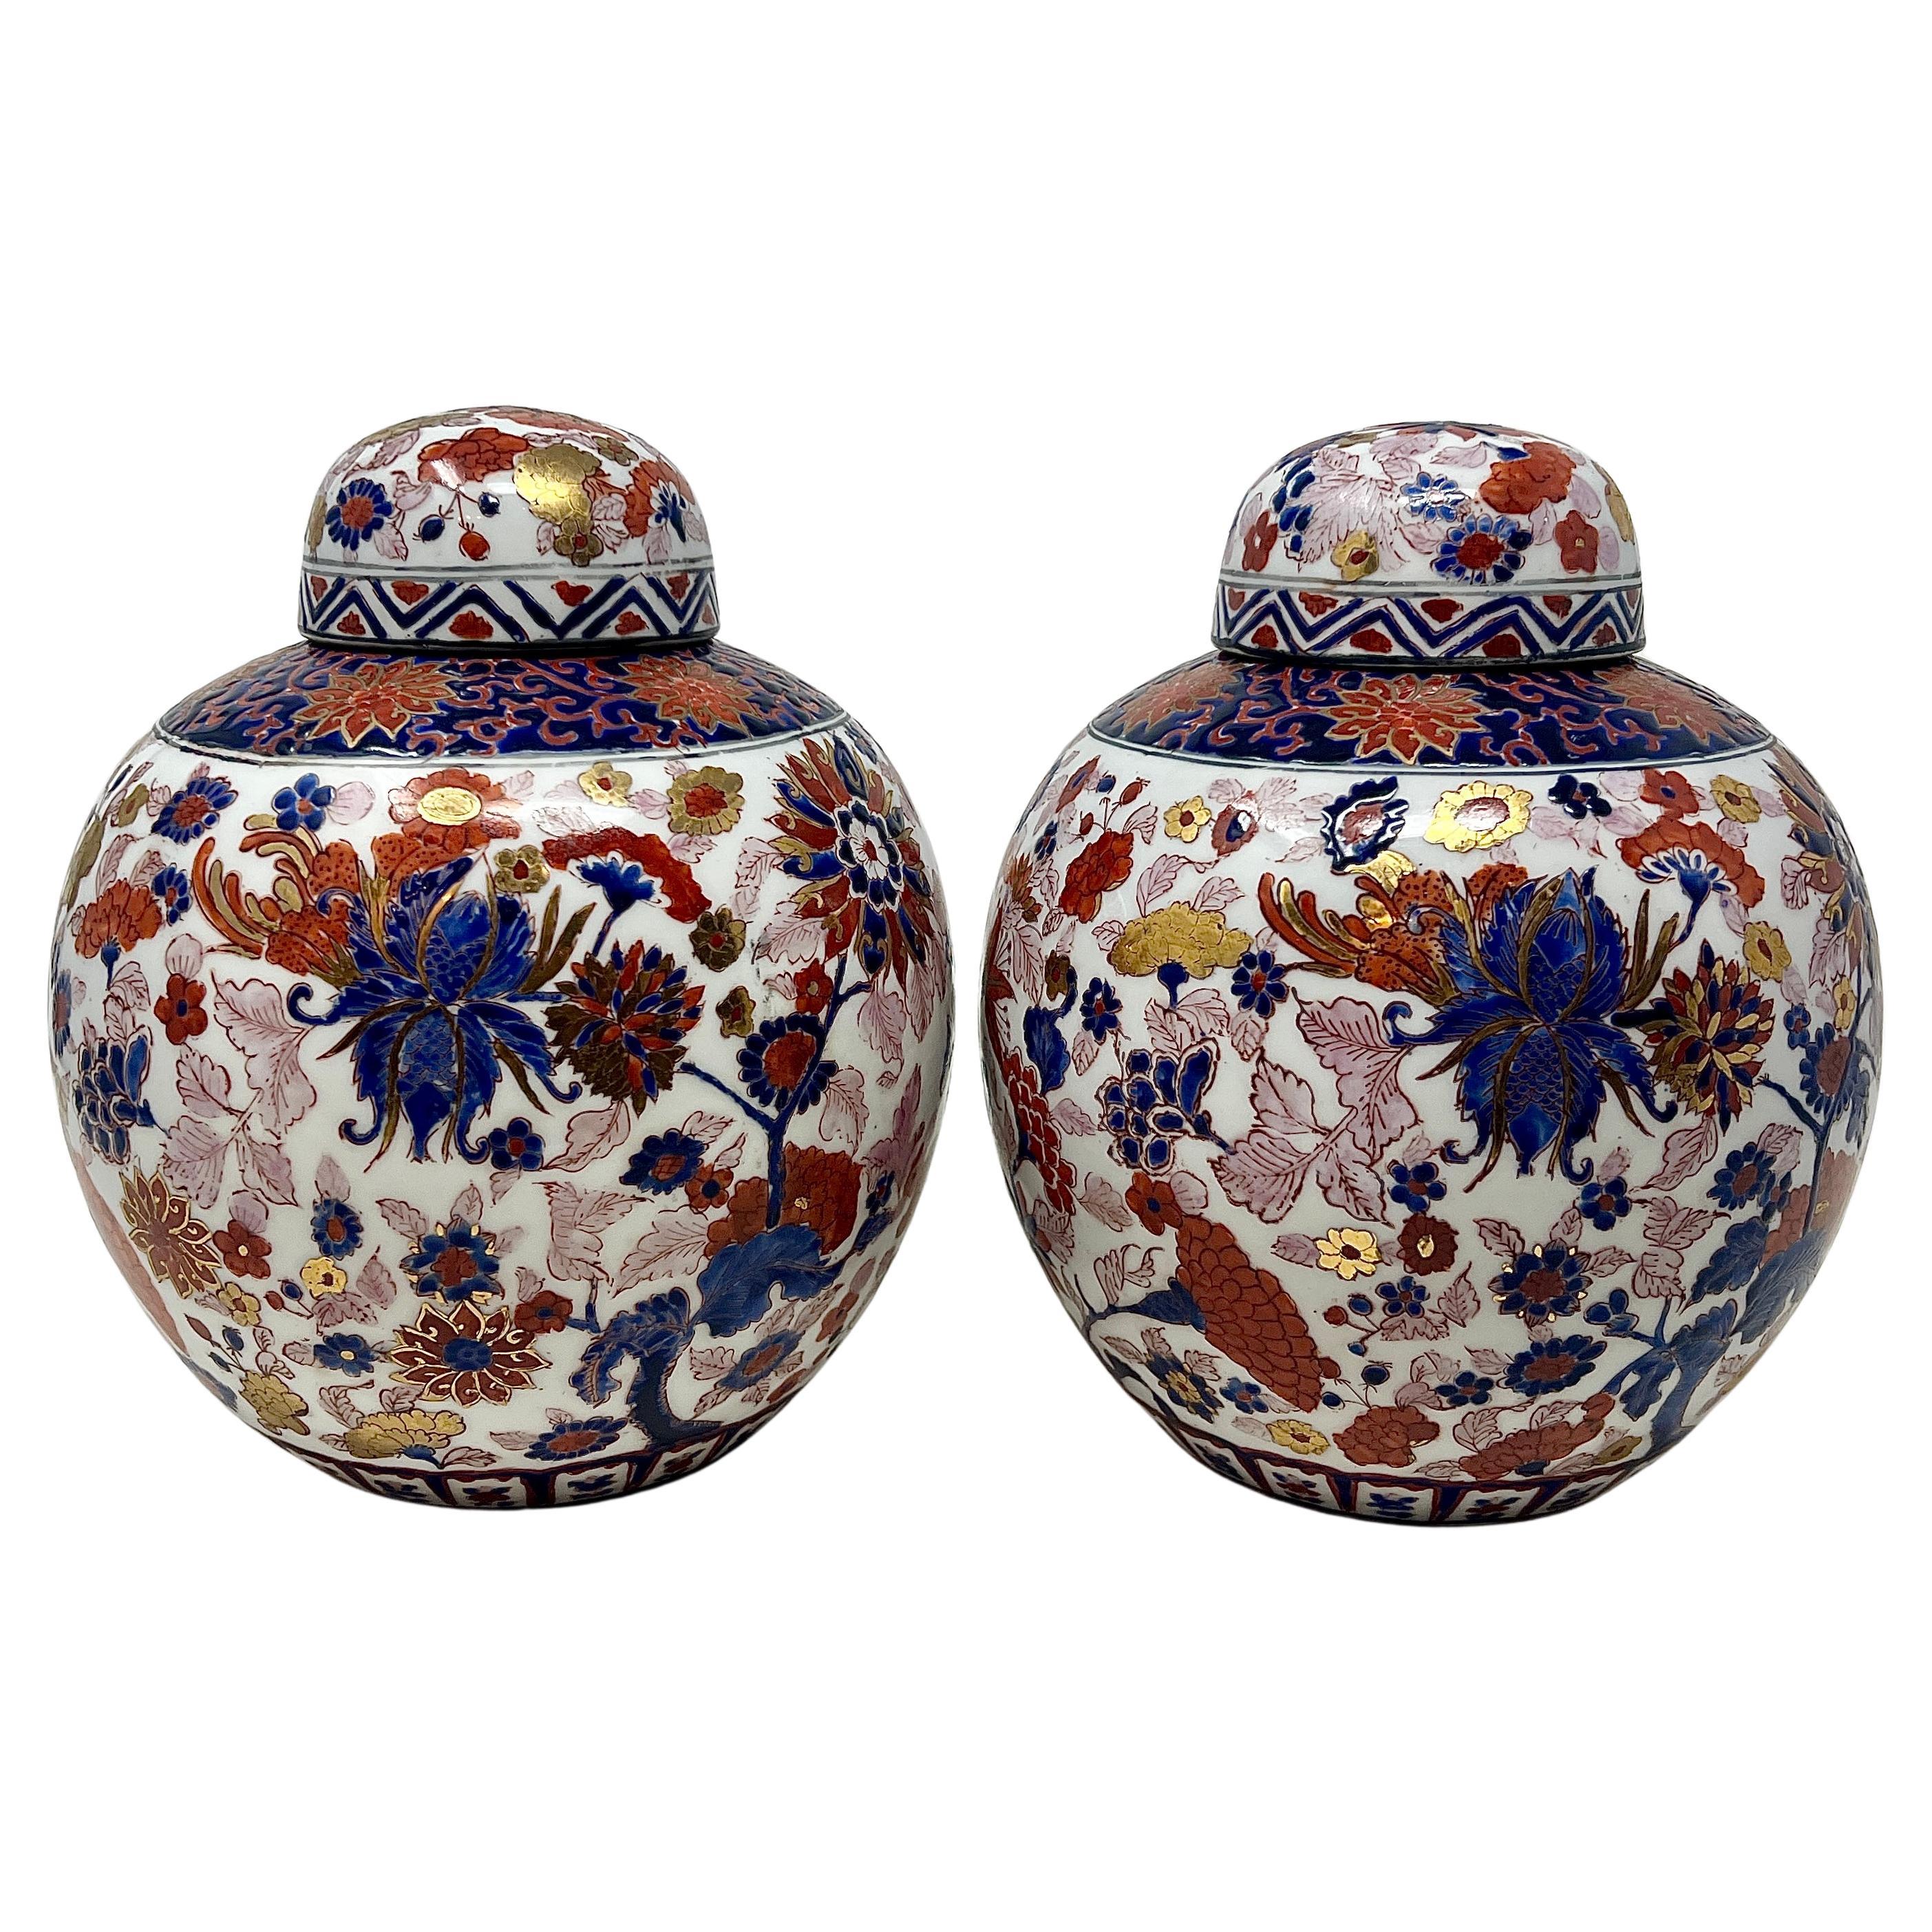 Pair of Antique 19th Century Porcelain Ginger Jars with Lids, Circa 1890.